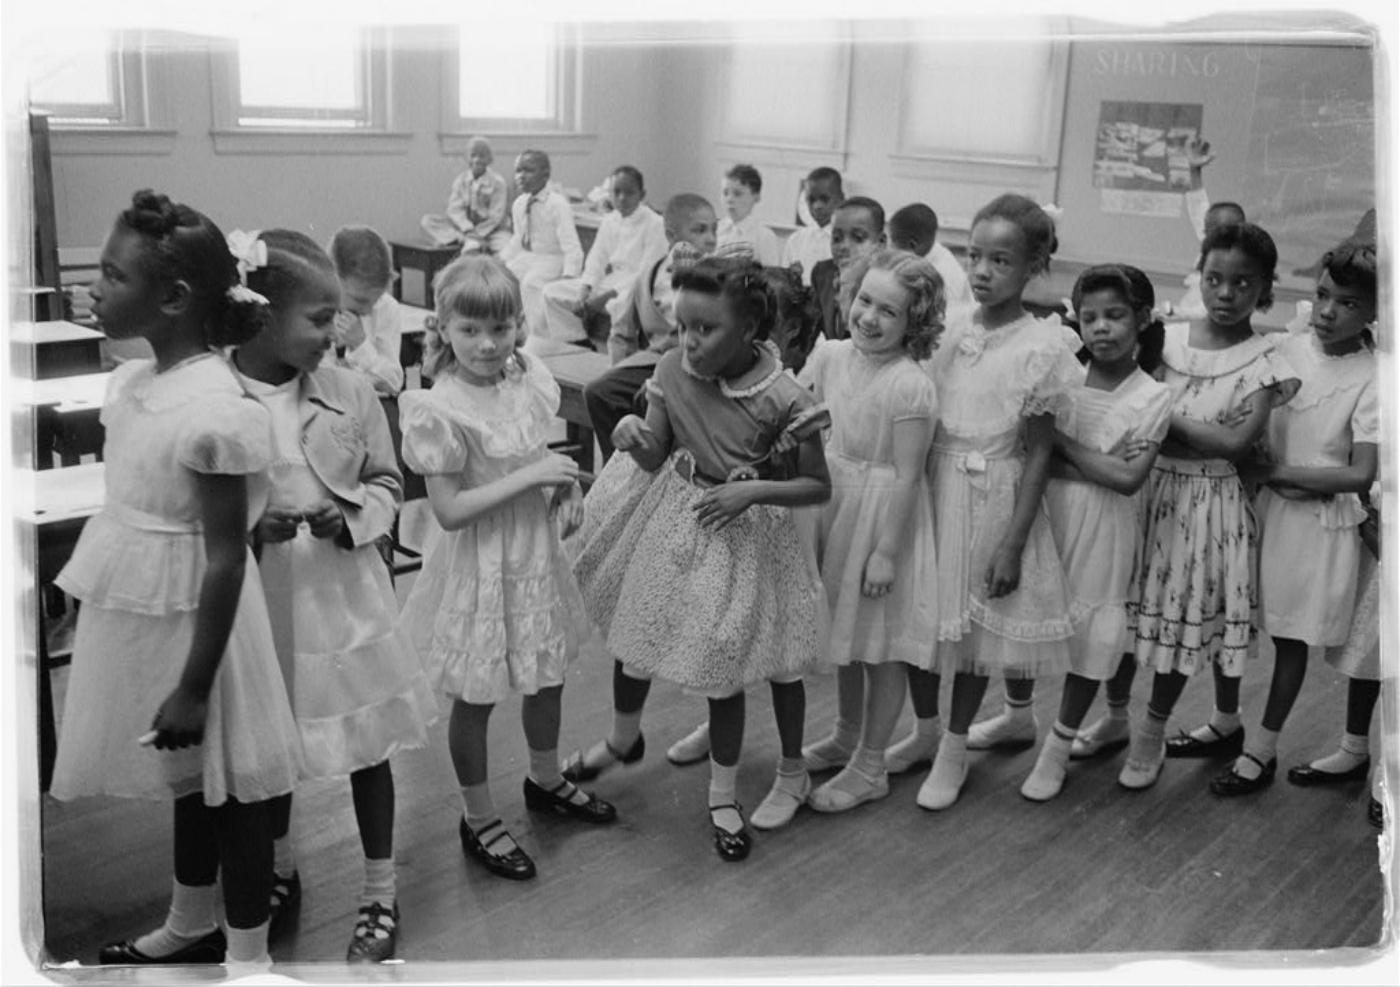 A group of black and white school children from an integrated school in Washington, D.C. in 1955.